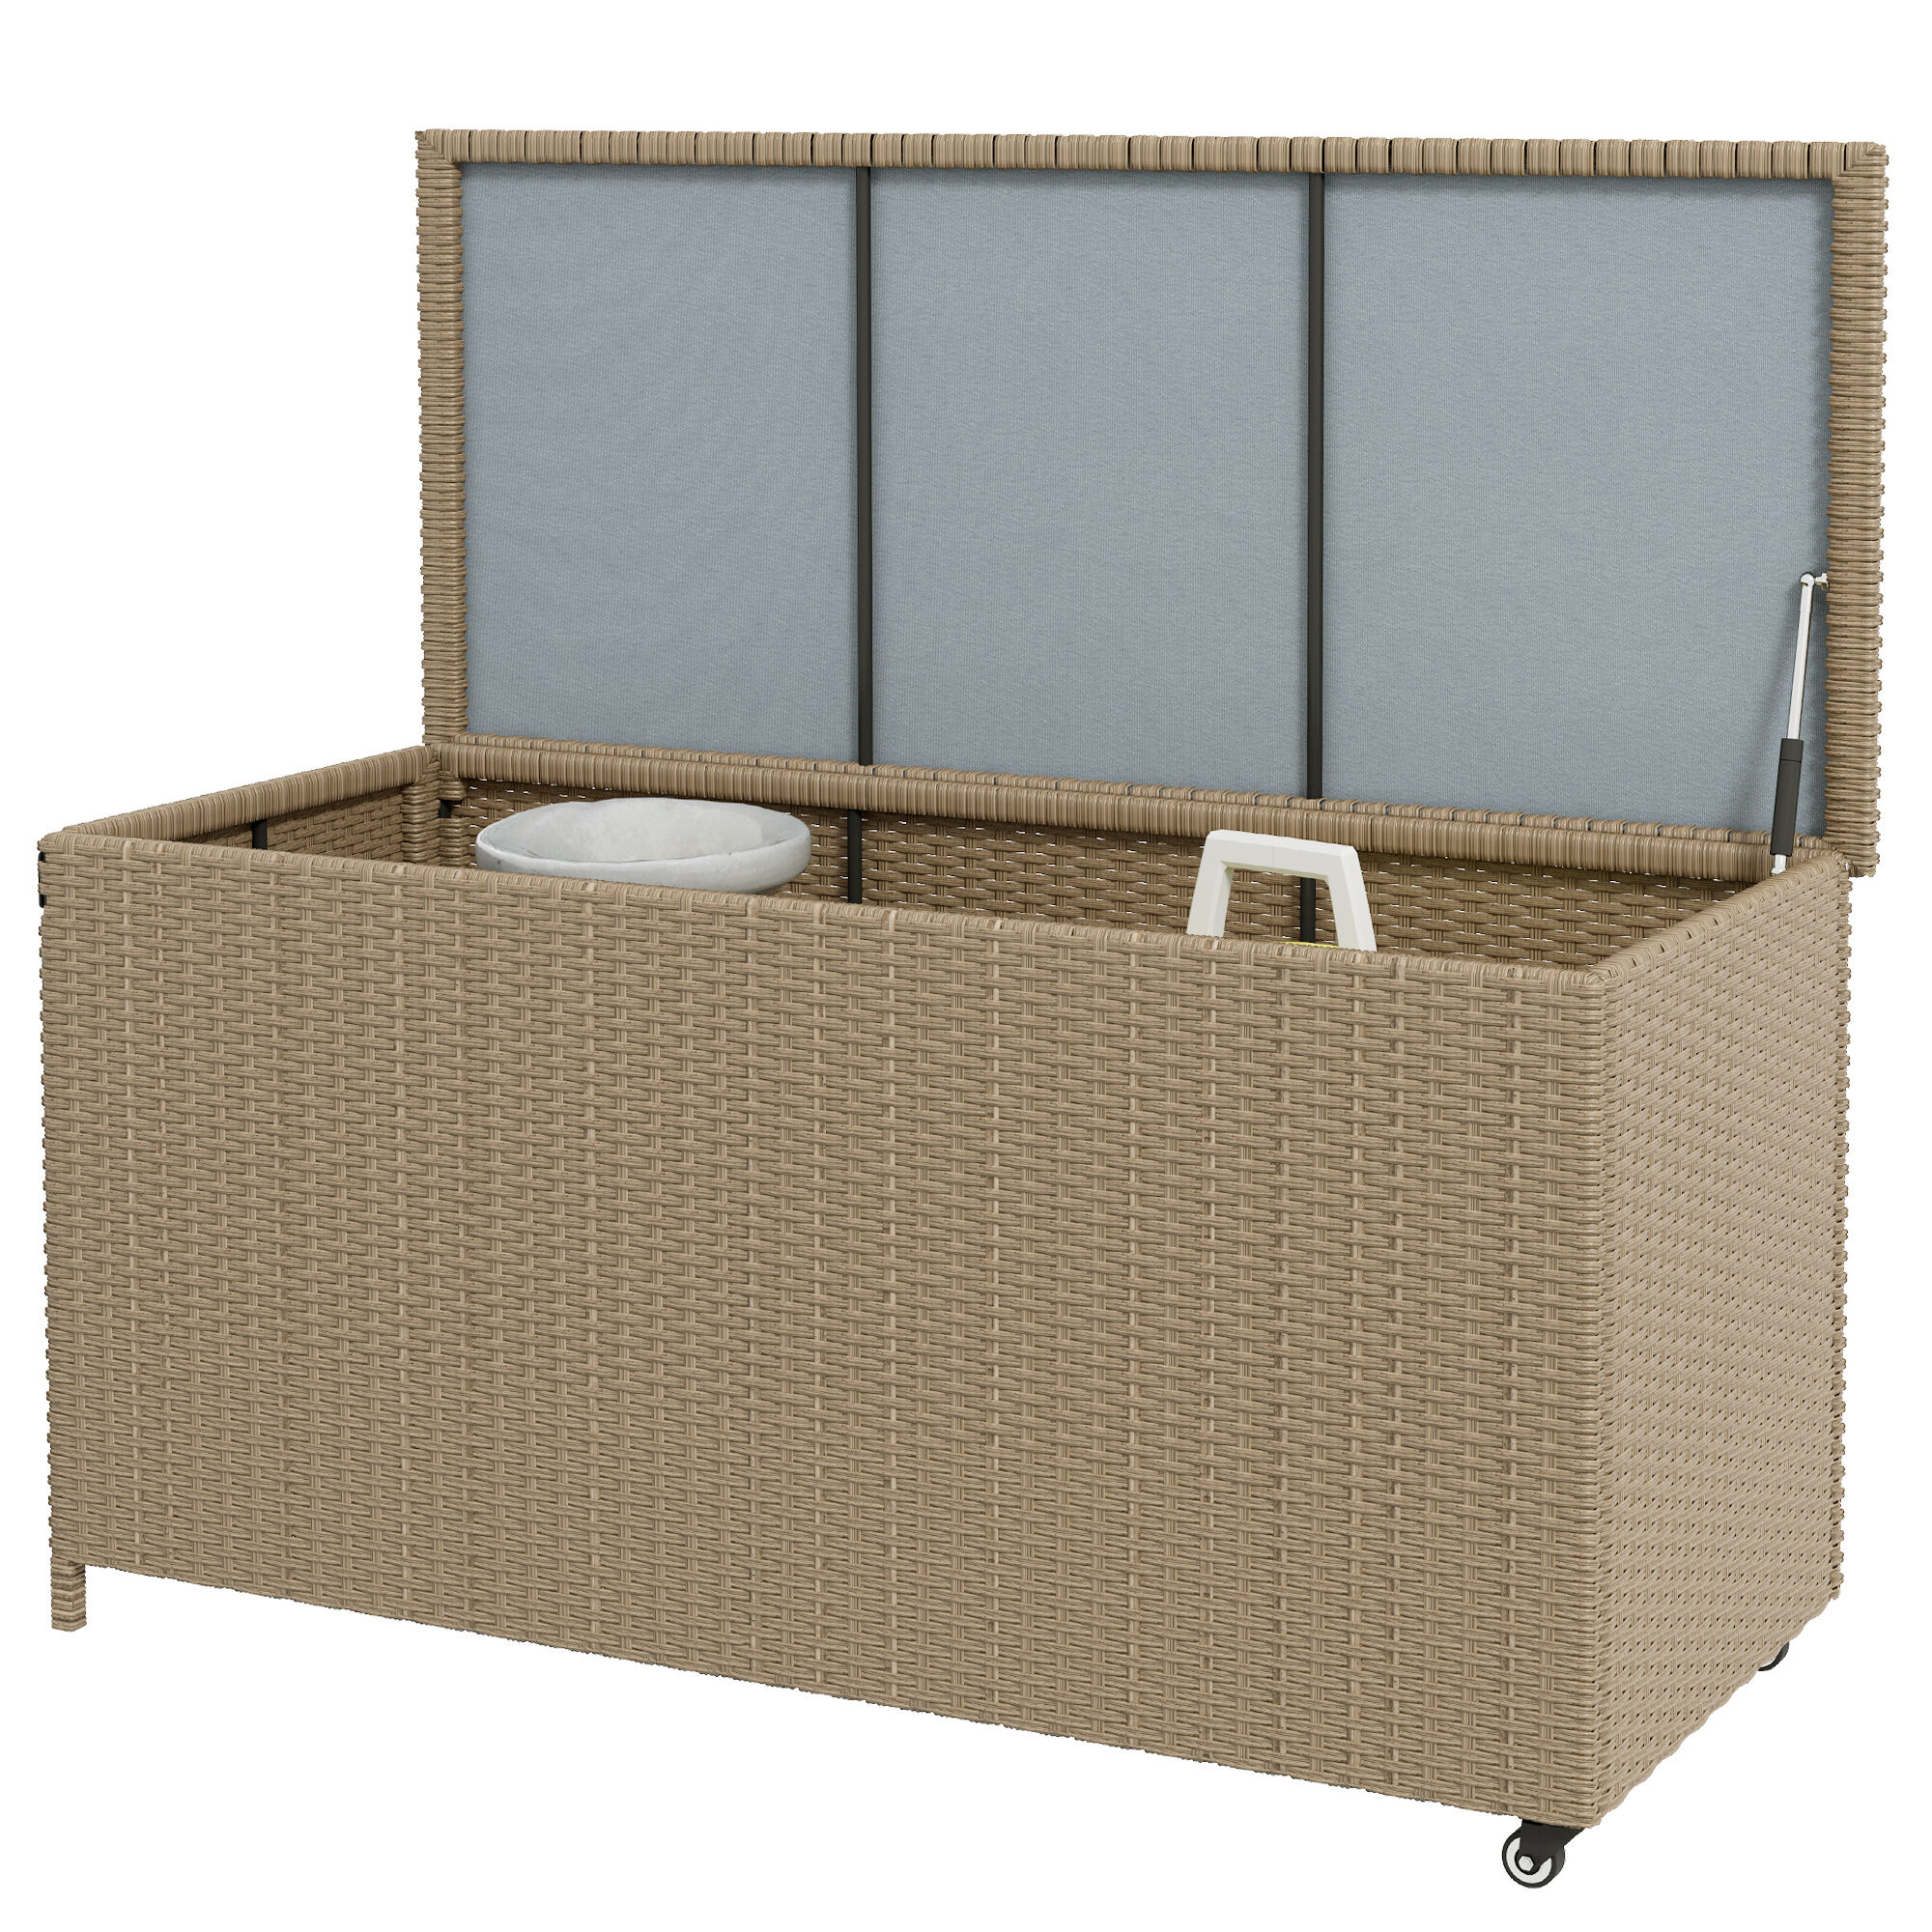 Outsunny 83 Gallon Rolling Deck Box Outdoor PE Wicker Storage Chest for Garden Tools and Pool Toys with Wheels Brown   Aosom.com